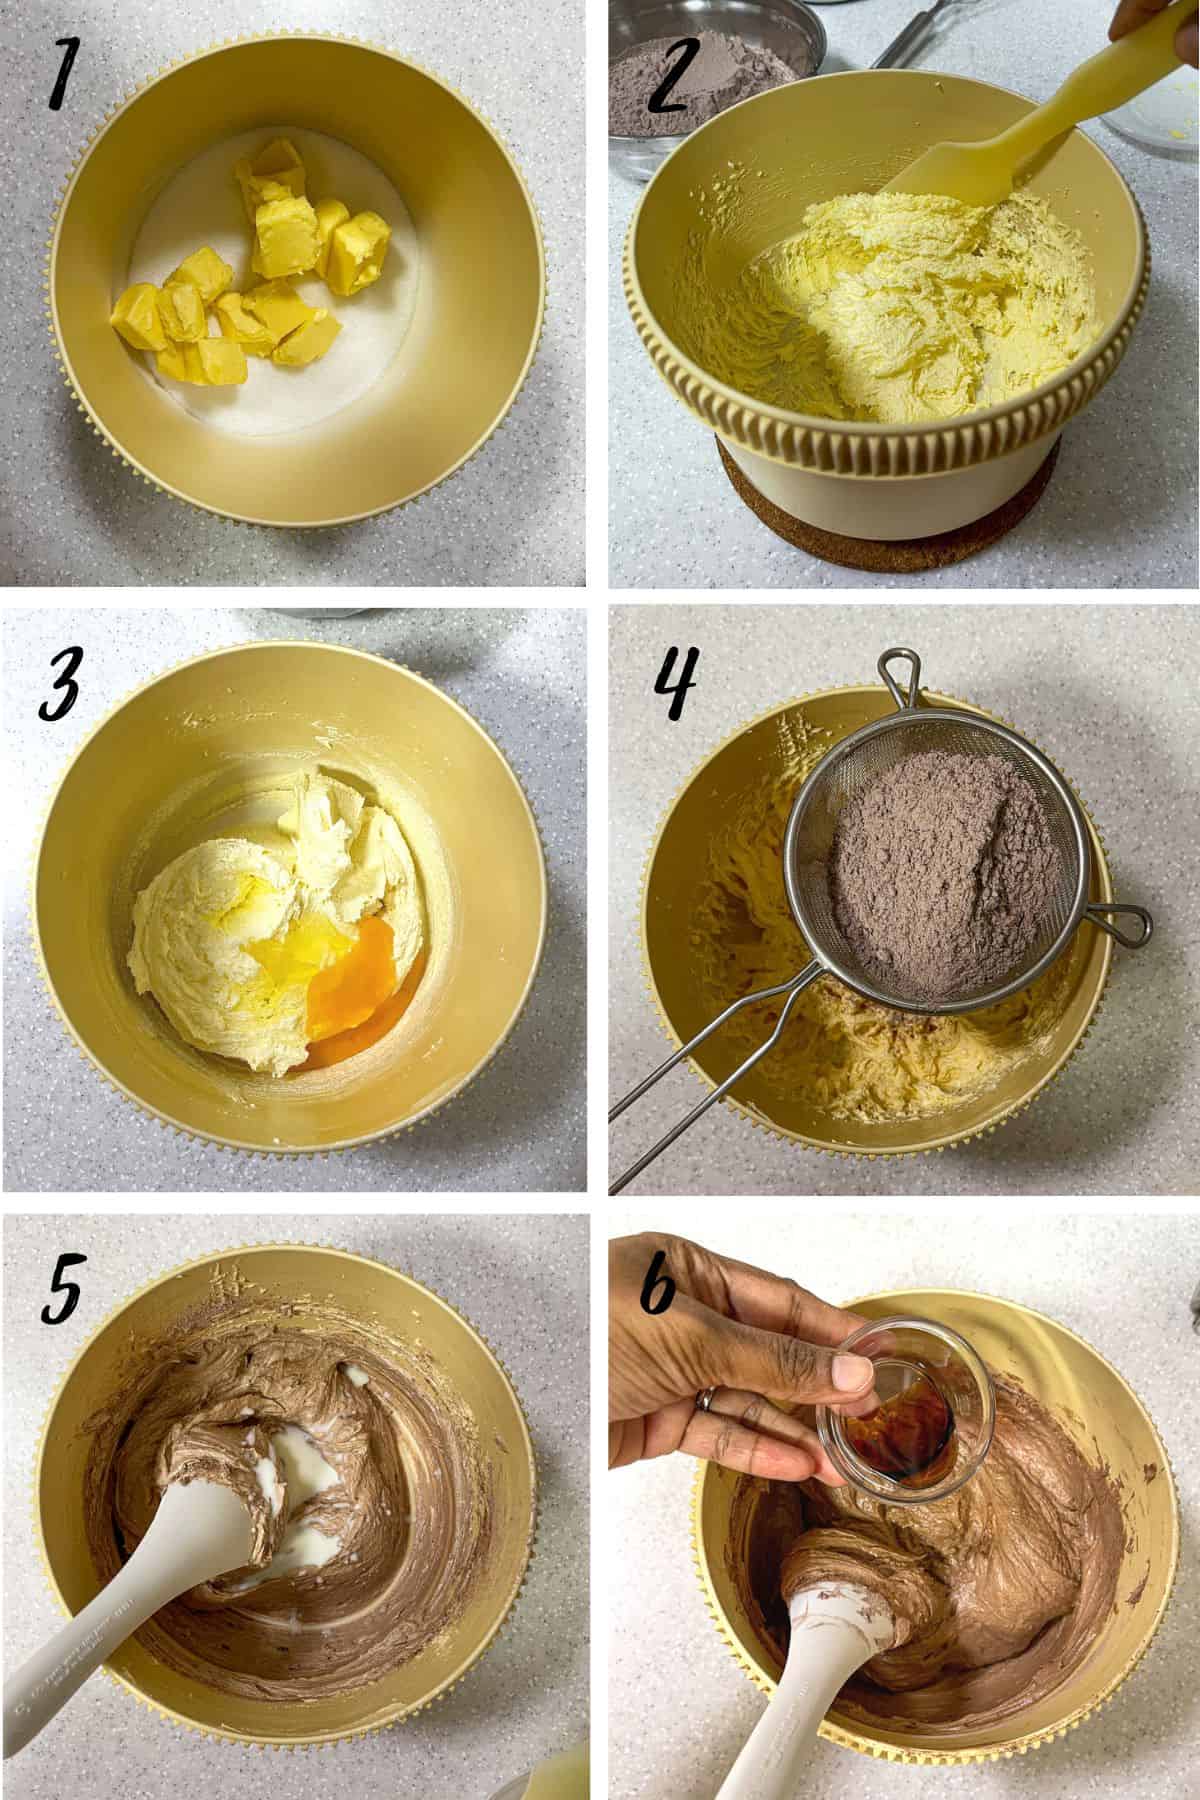 A poster of 6 images showing how to mix chocolate pound cake batter.